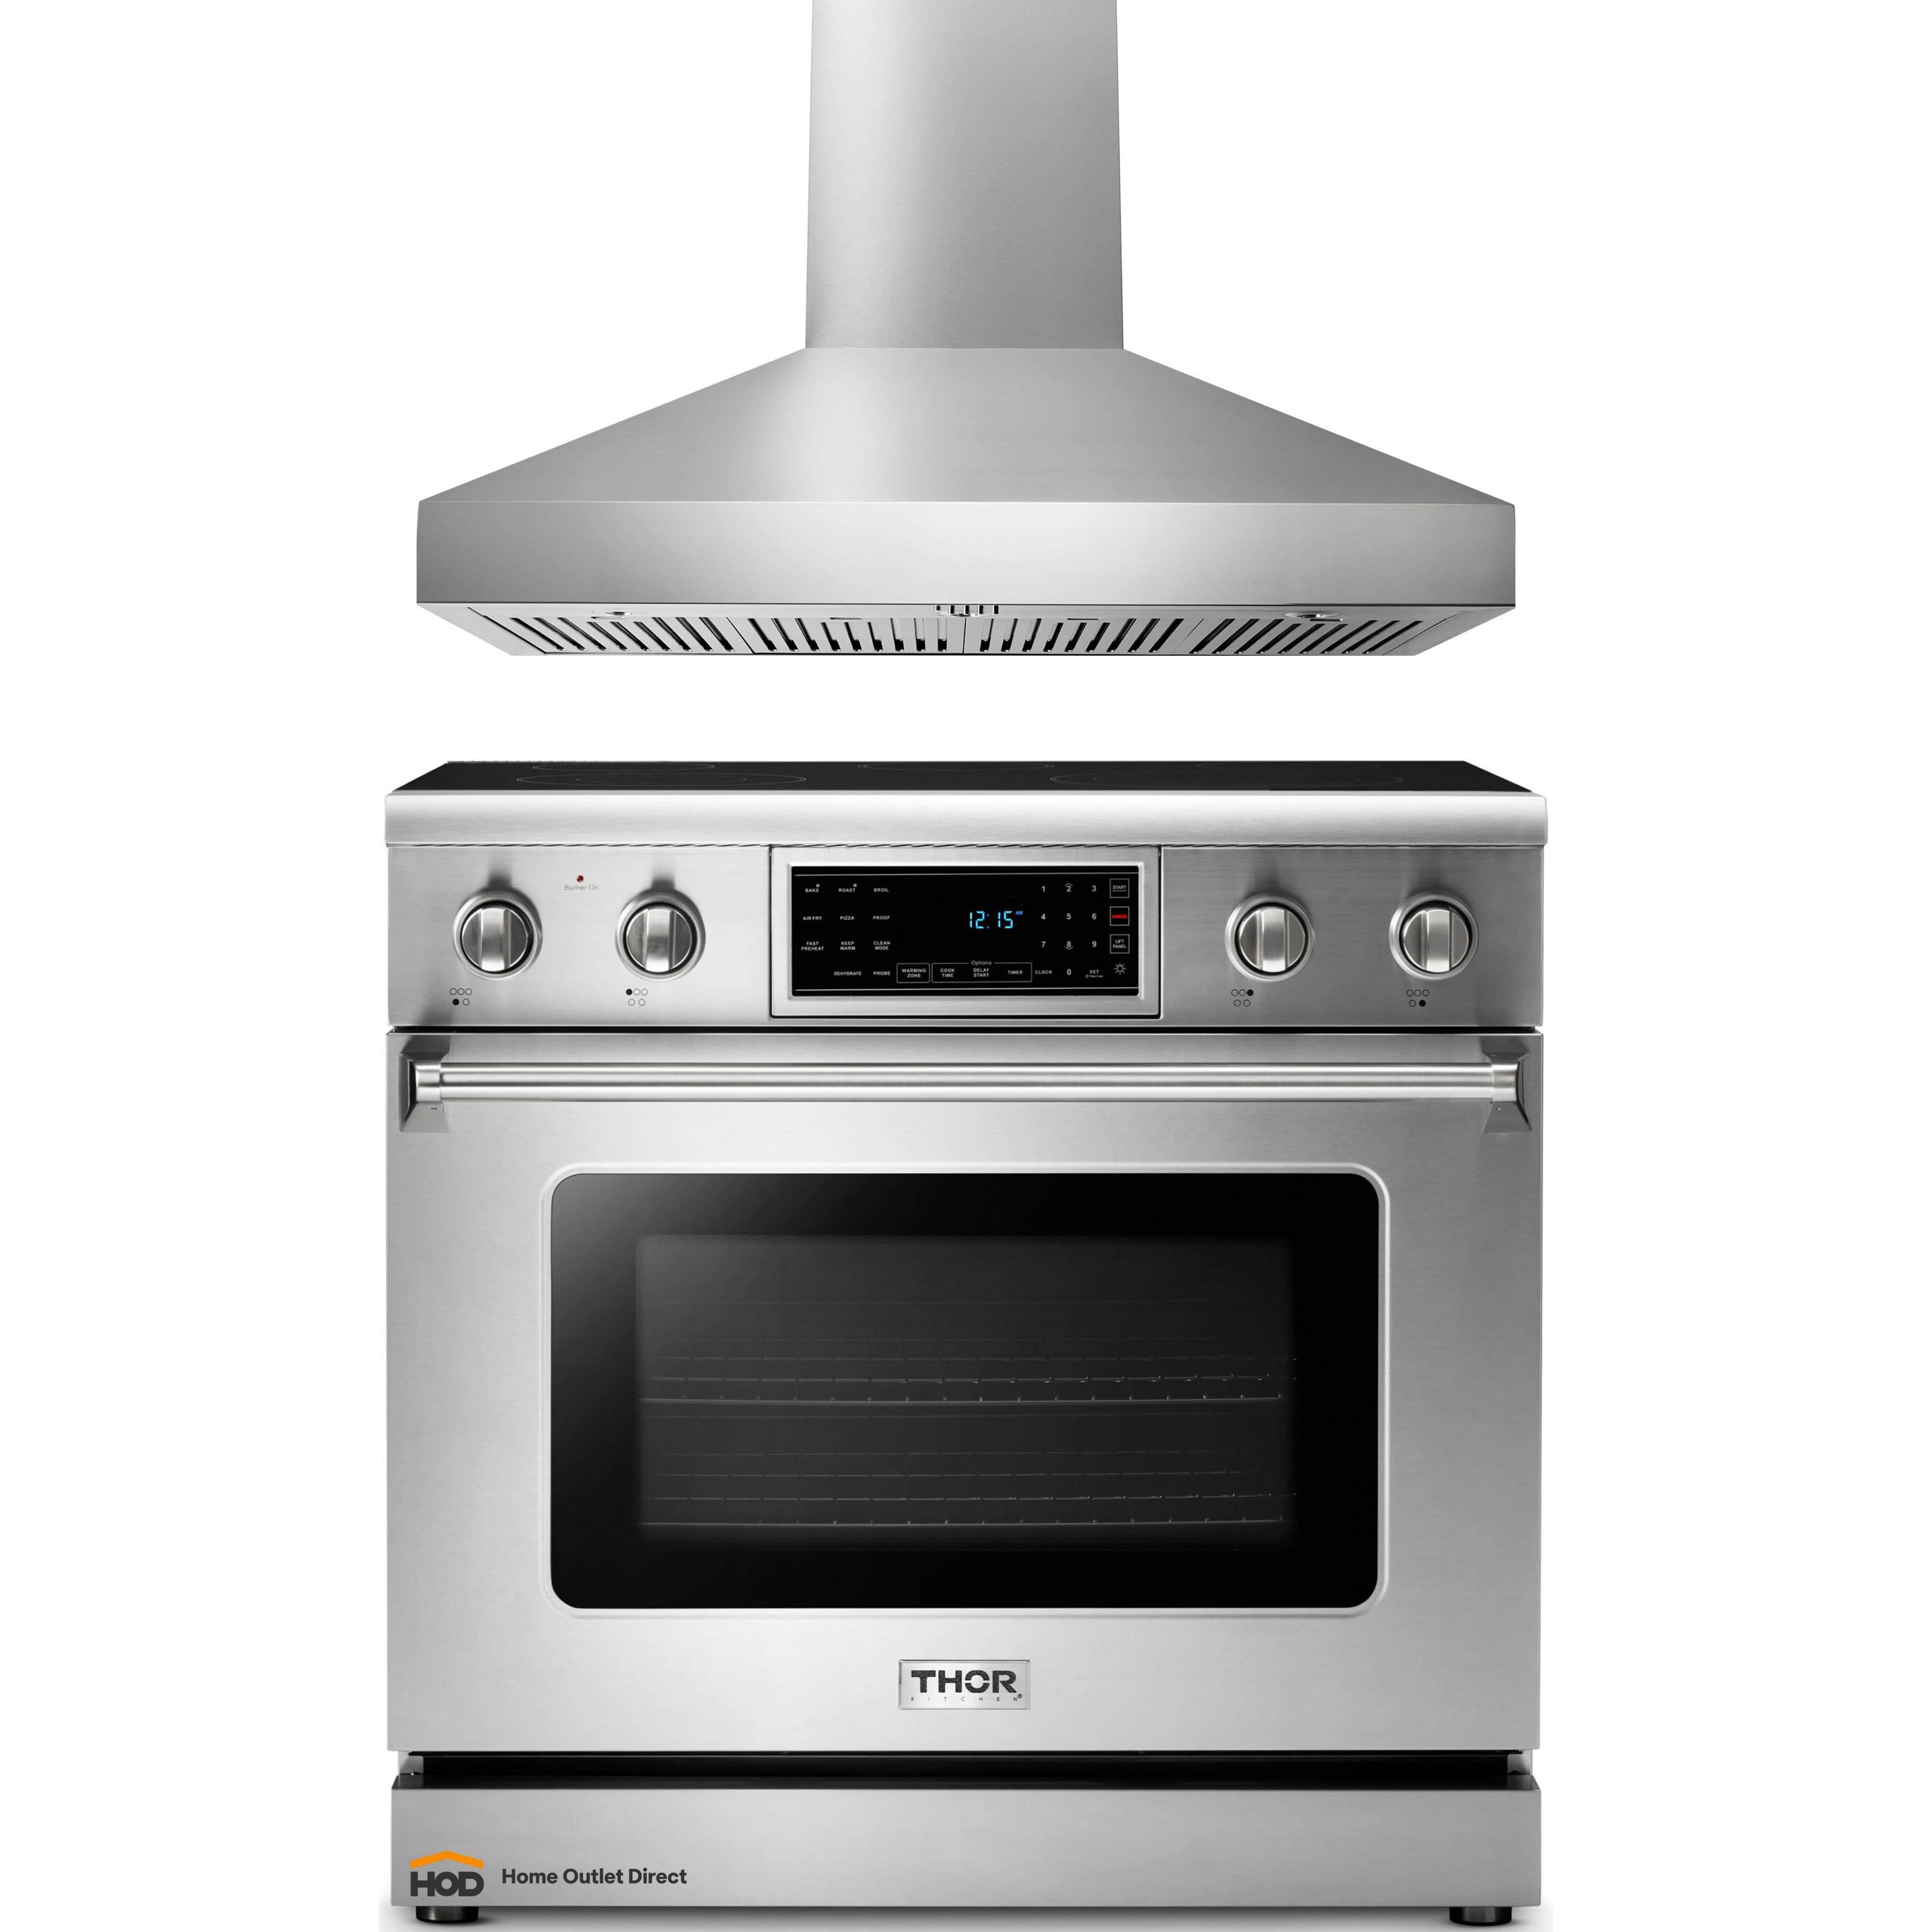 Thor Kitchen 2-Piece Appliance Package - 36-Inch Electric Range with Tilt Panel and Pro-Style Wall Mount Hood in Stainless Steel